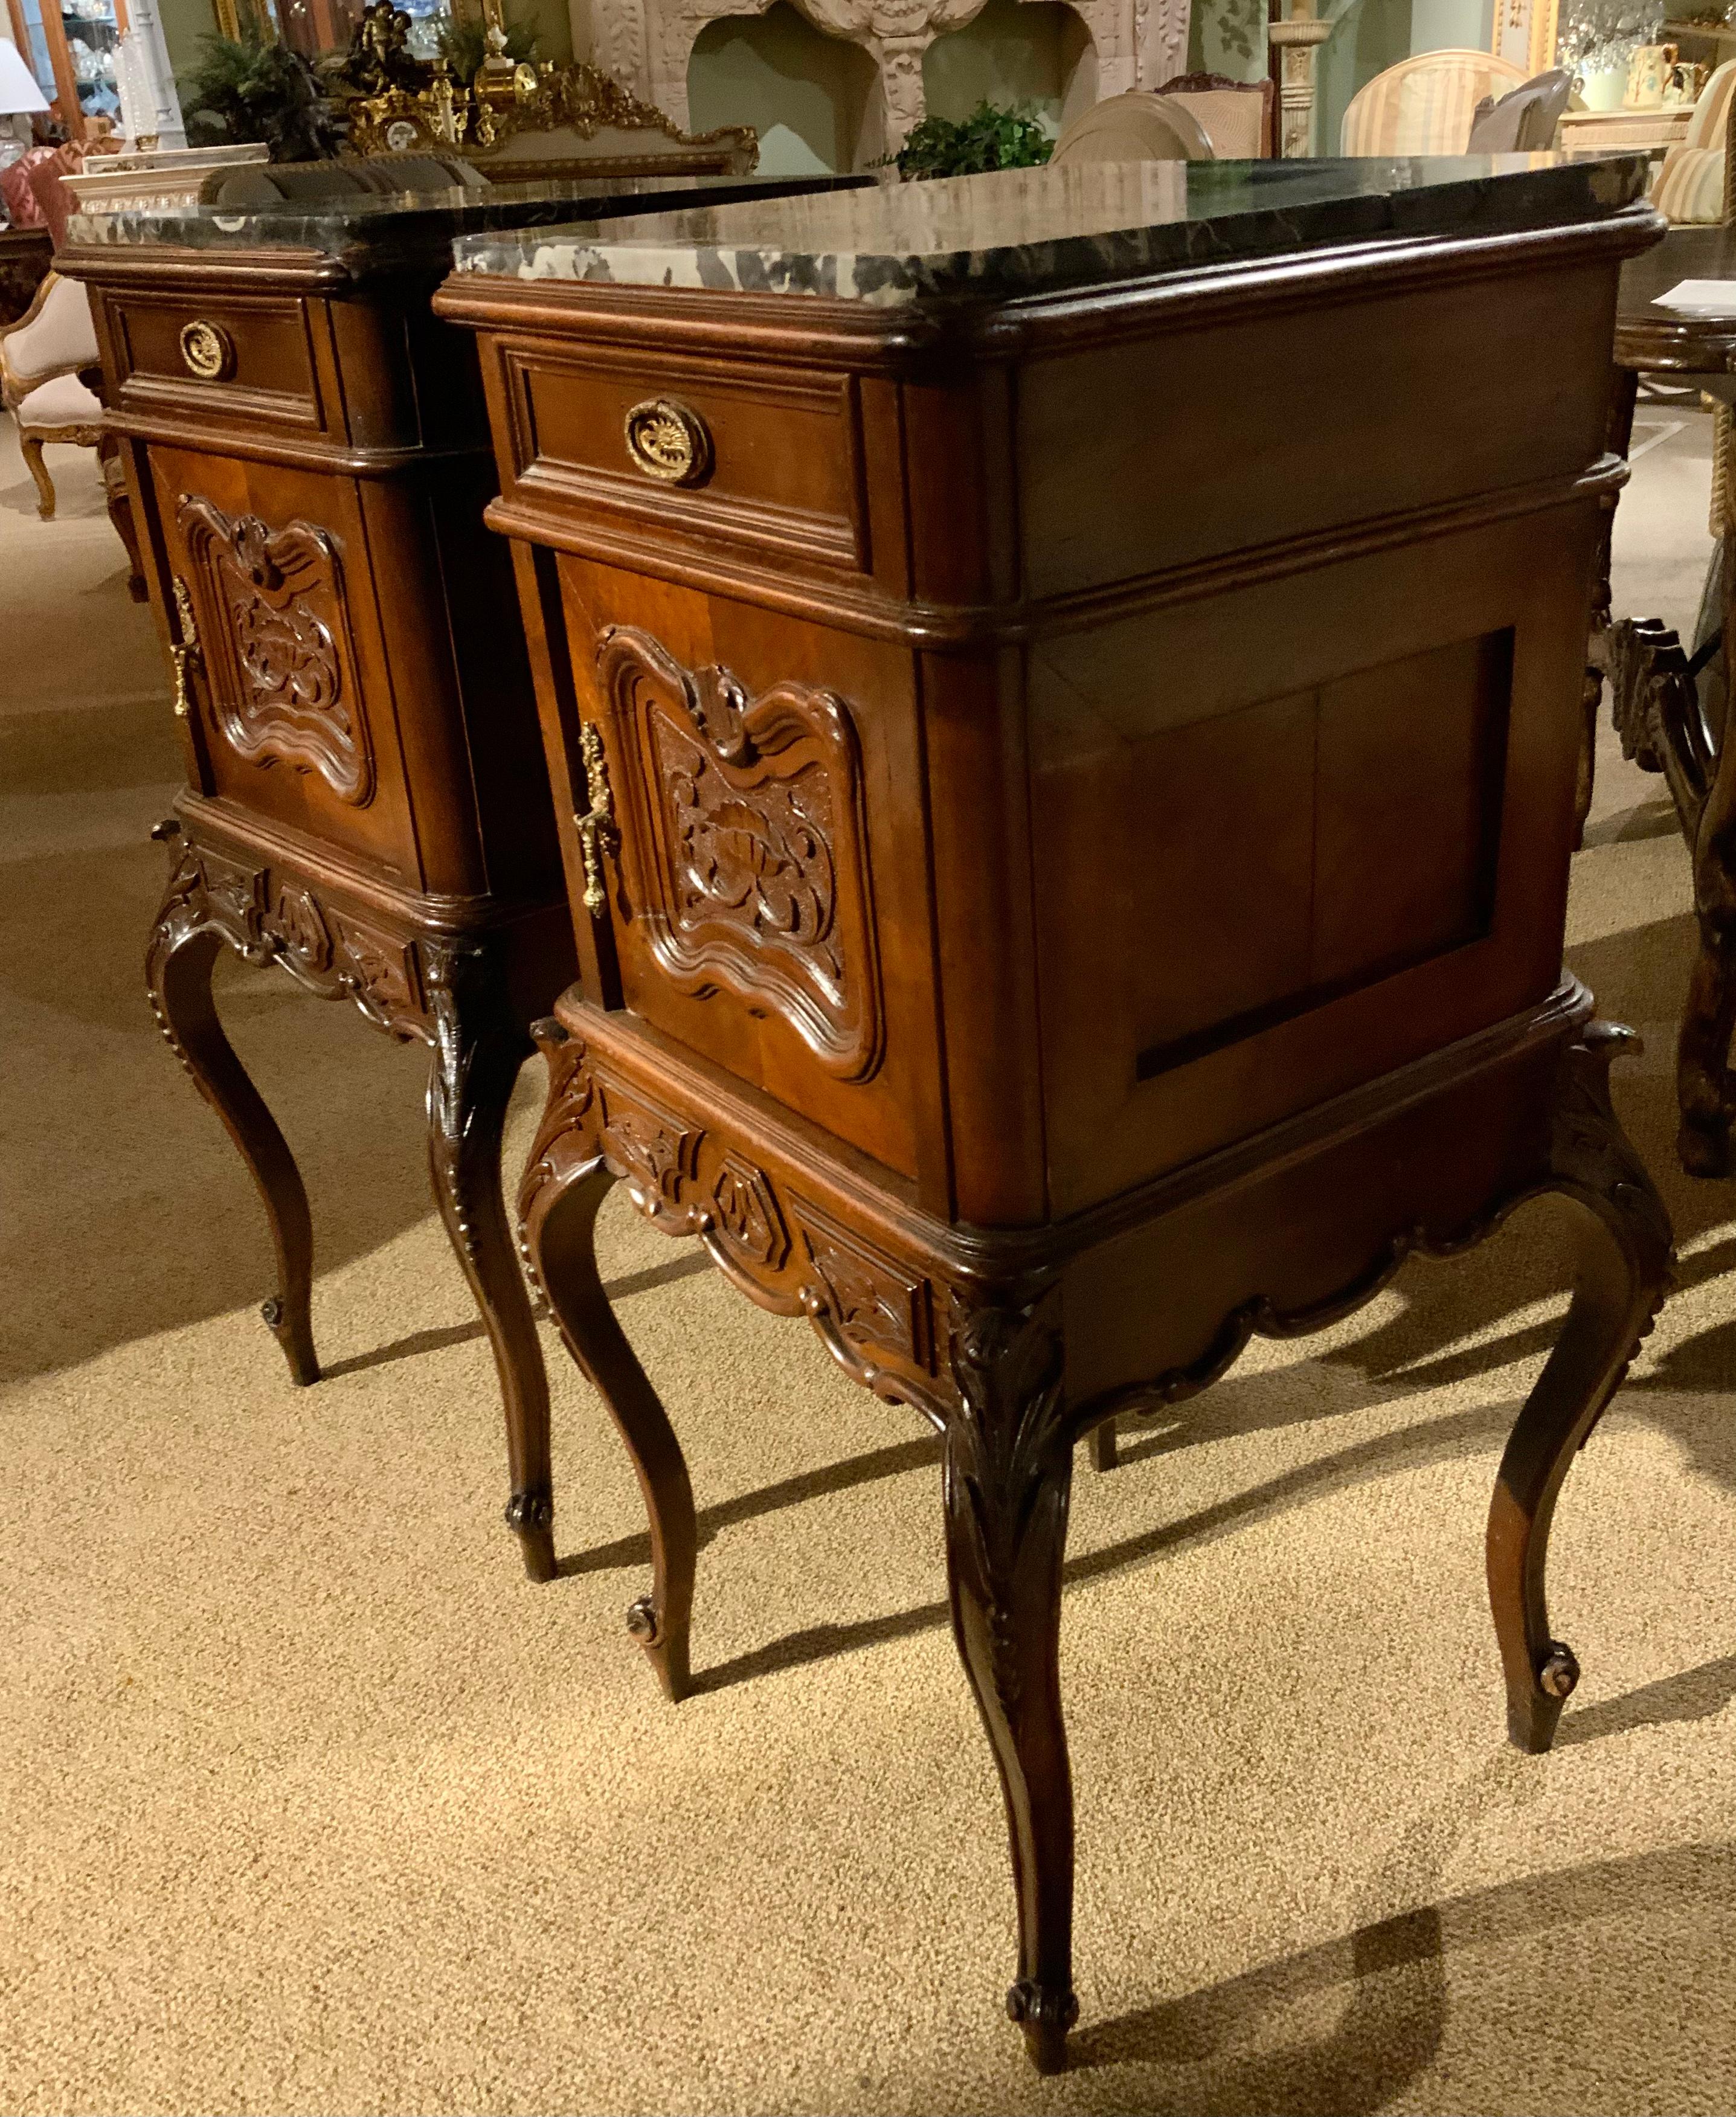 Pair of walnut bedside cabinets with exceptional carving and a black  and
Gold marble top. The cabriole legs are gracefully carved on both the
Front and back. The hardware is original and very well done.  The doors
And drawers open easily and have